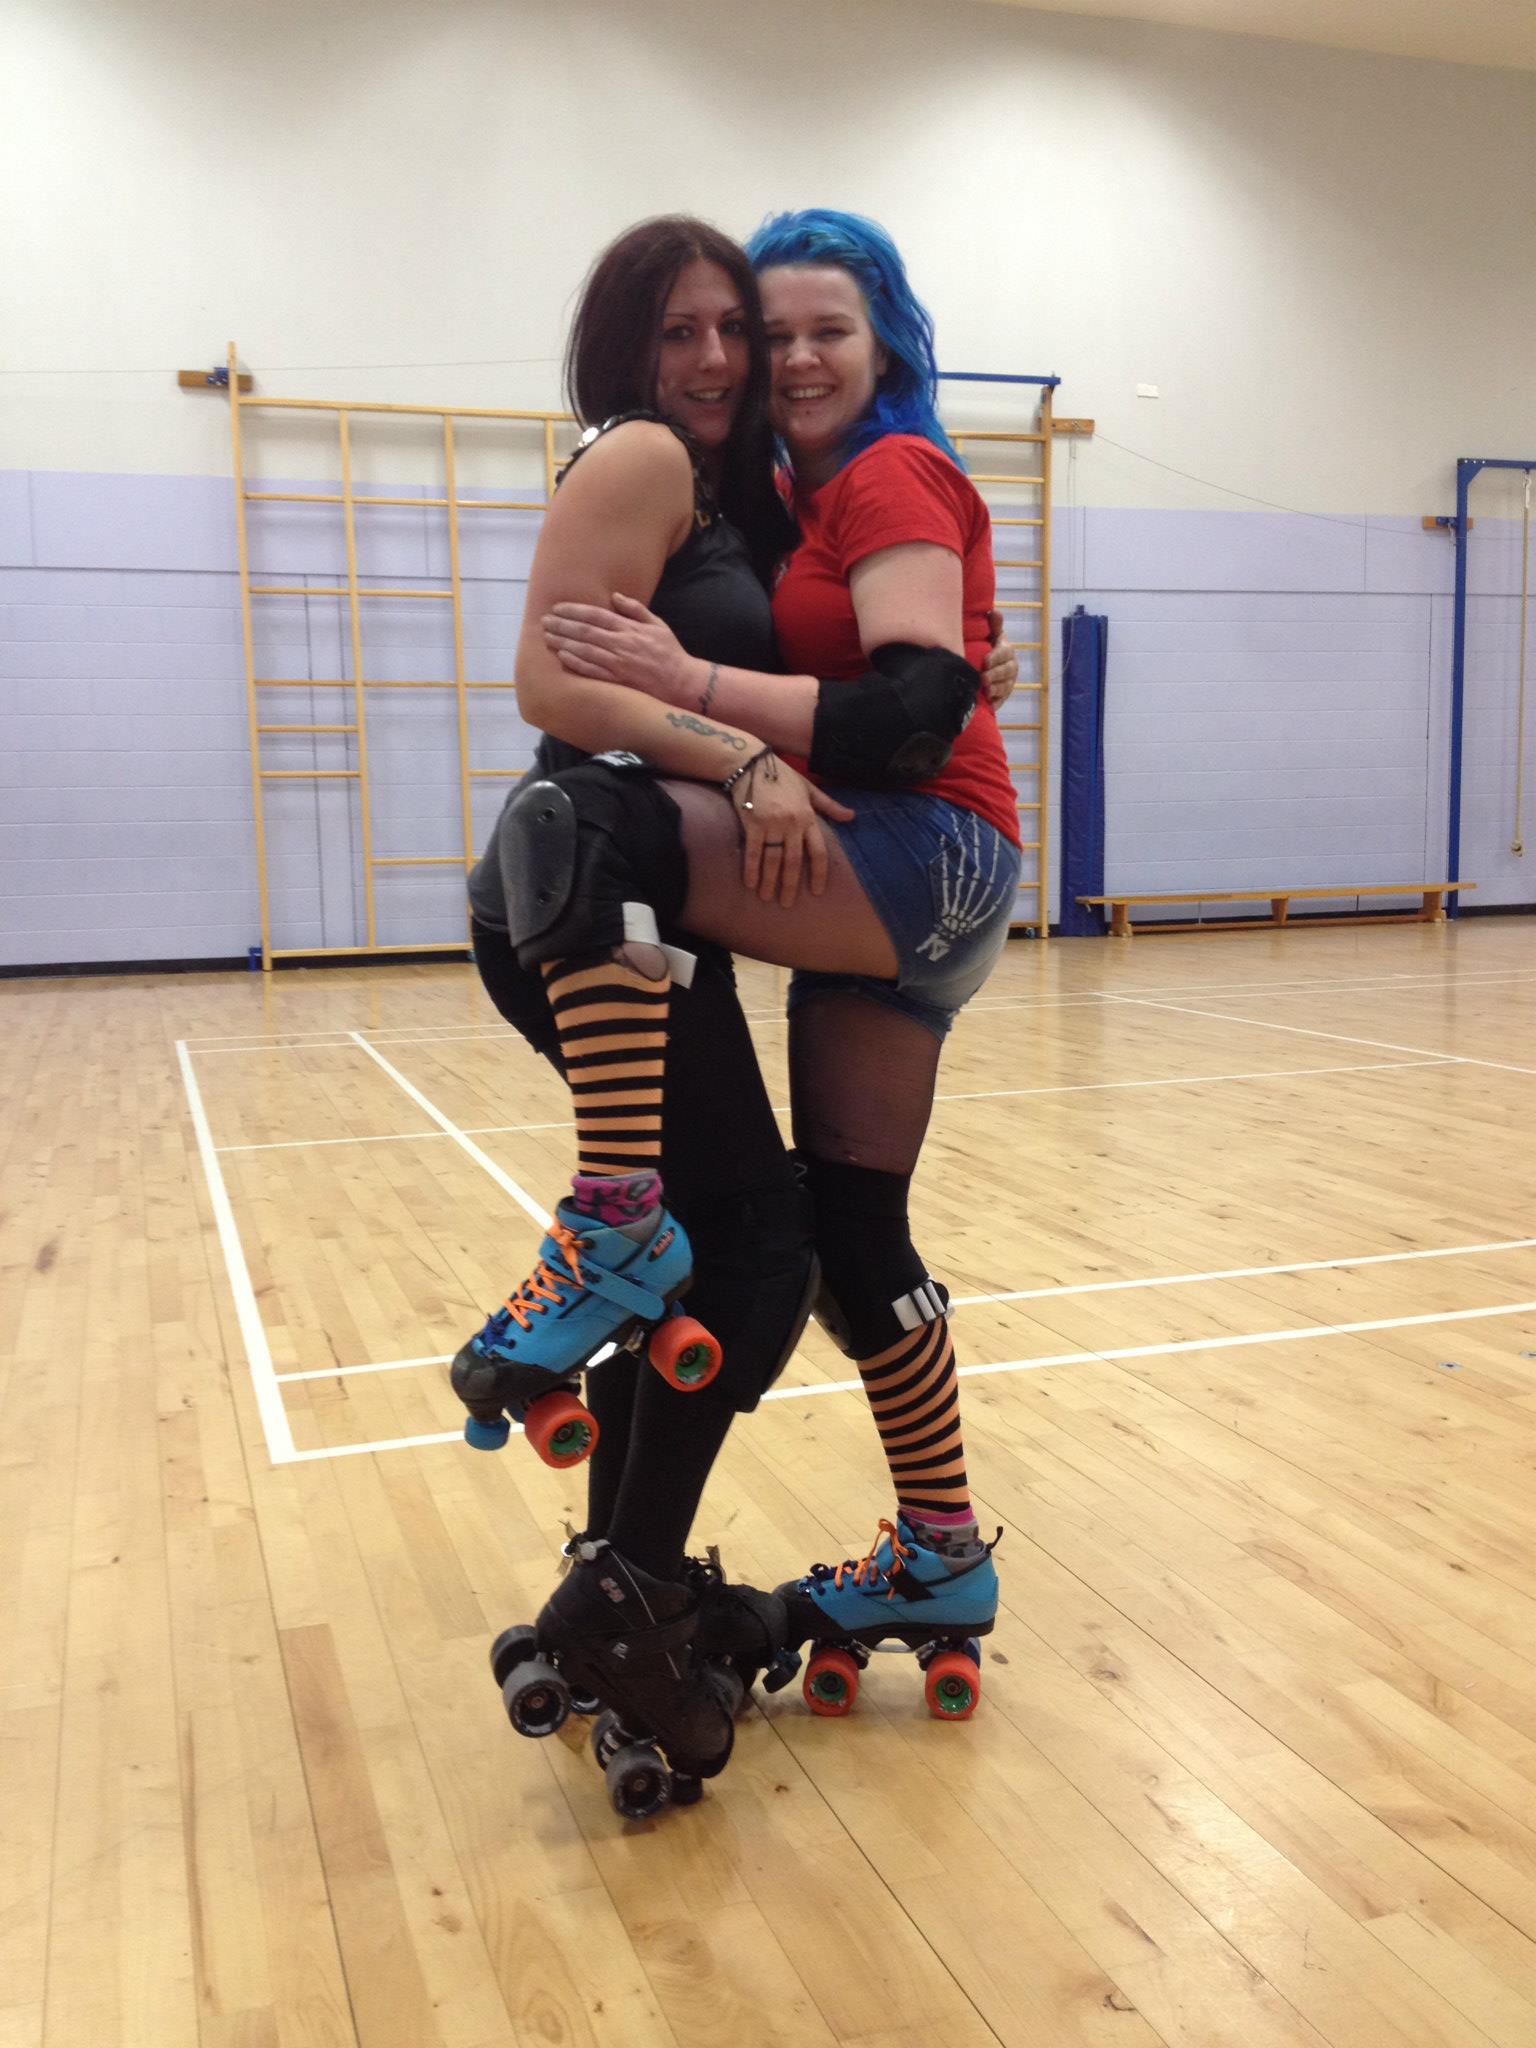 Irn Bruzer (now with appropriately blue hair!) poses with derby-wife Natorious Red at their Christmas skate.